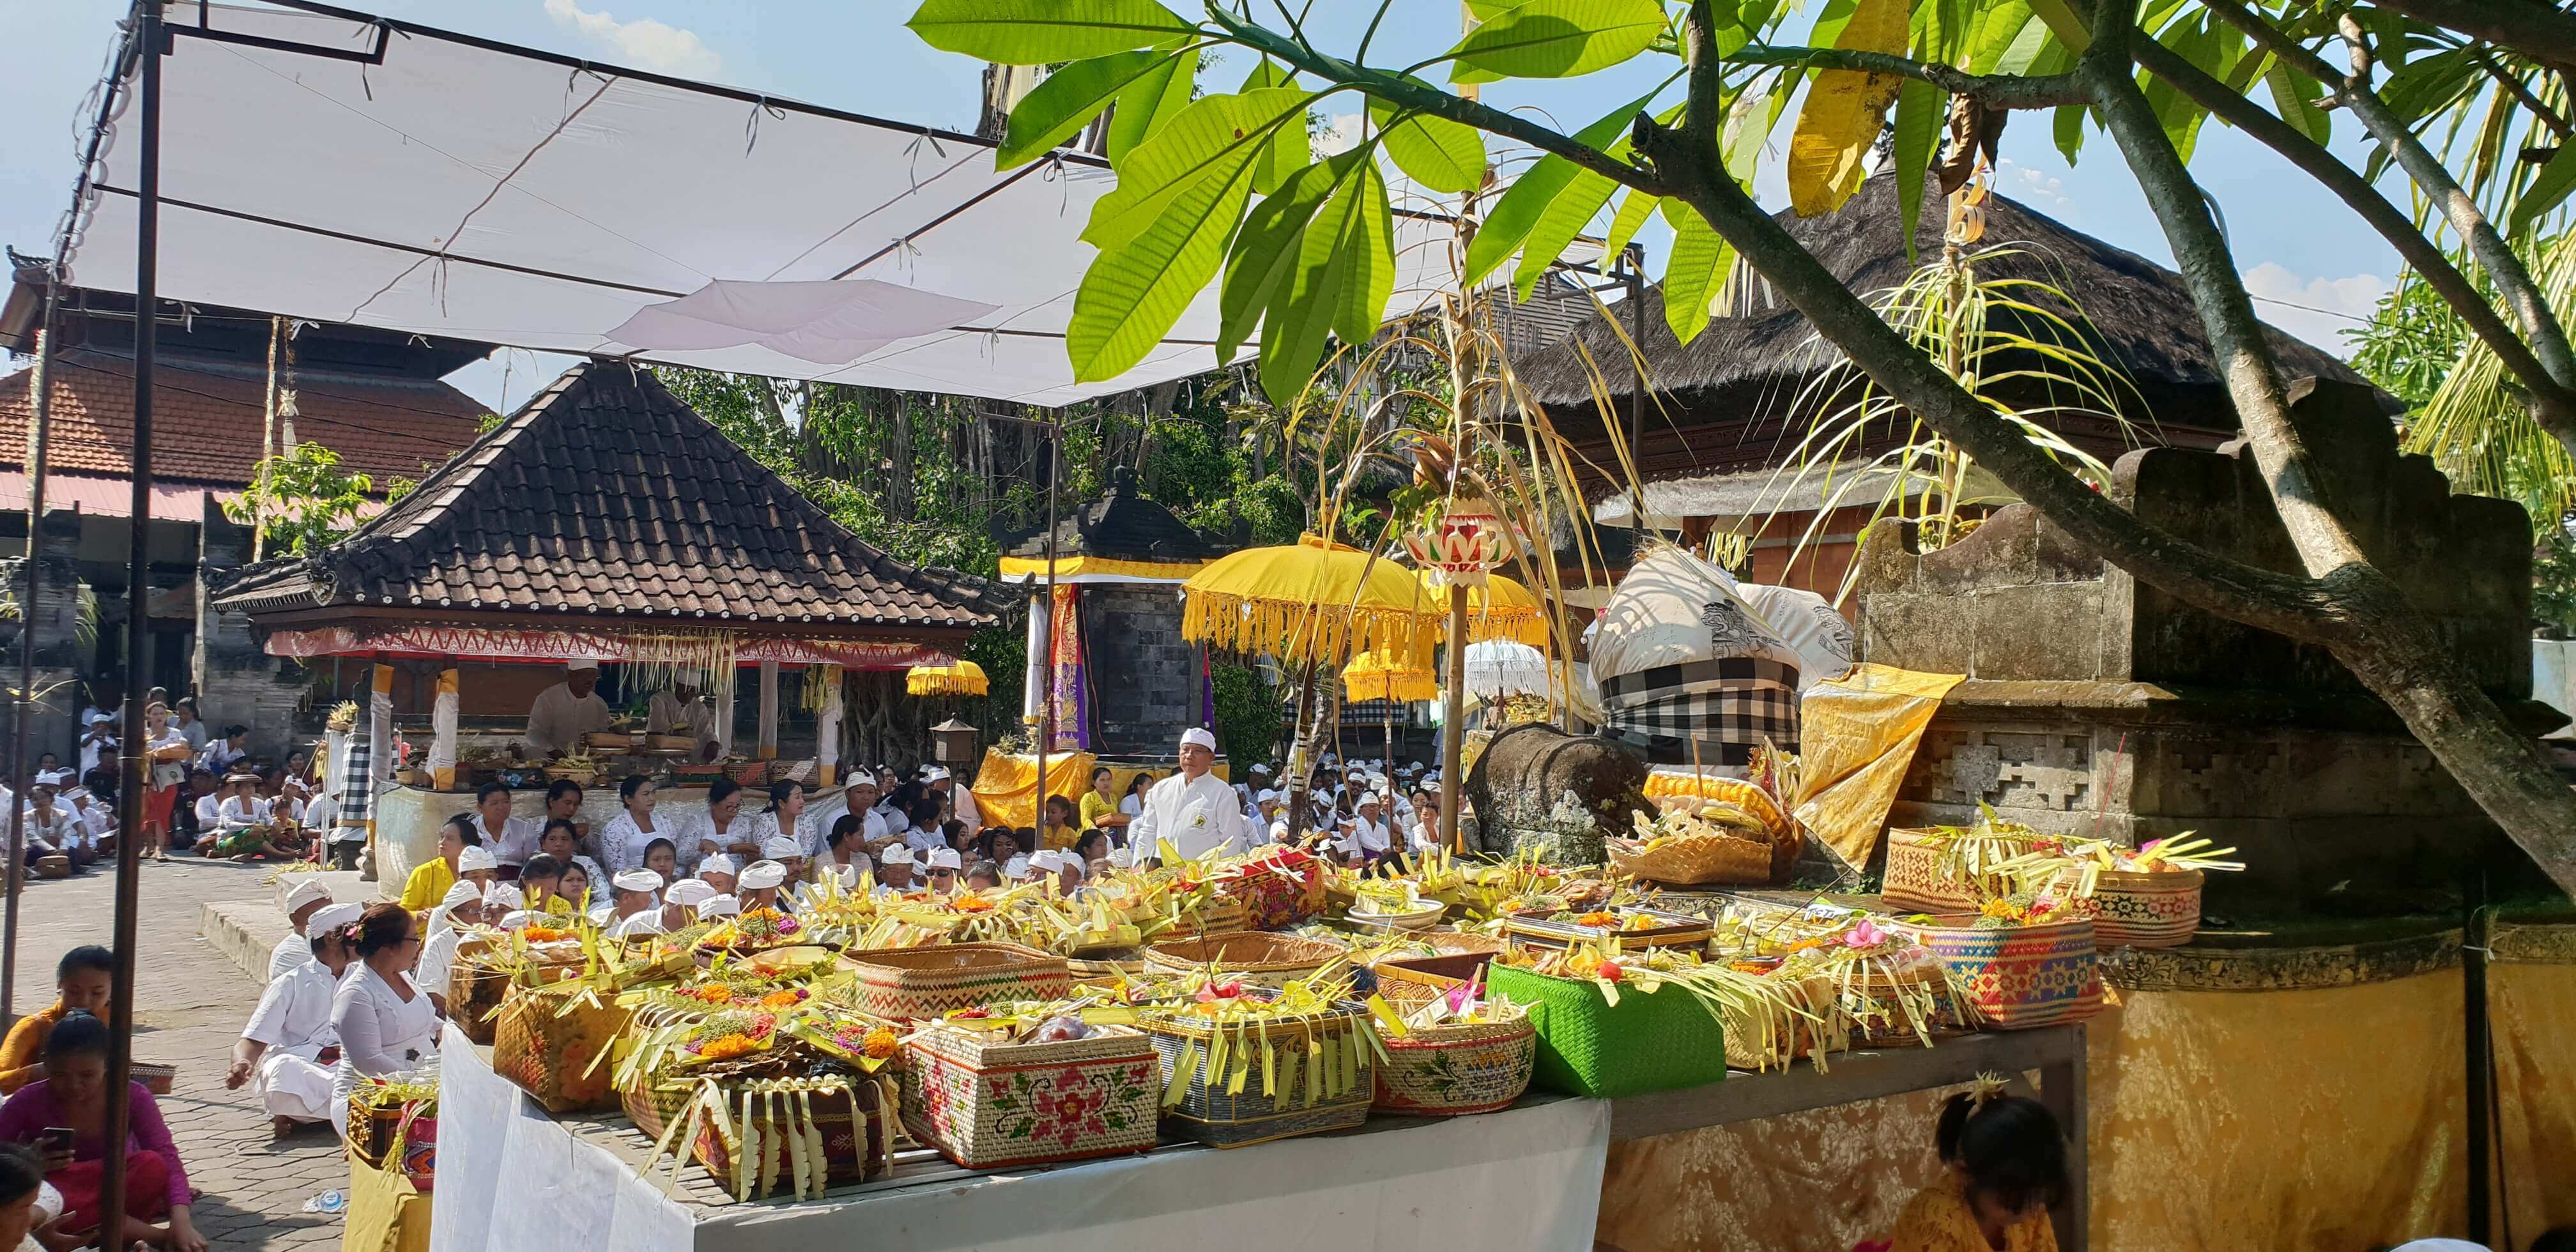 The Pura Blanjong is a Hindu temple that has to feature in your list of things to do in Sanur